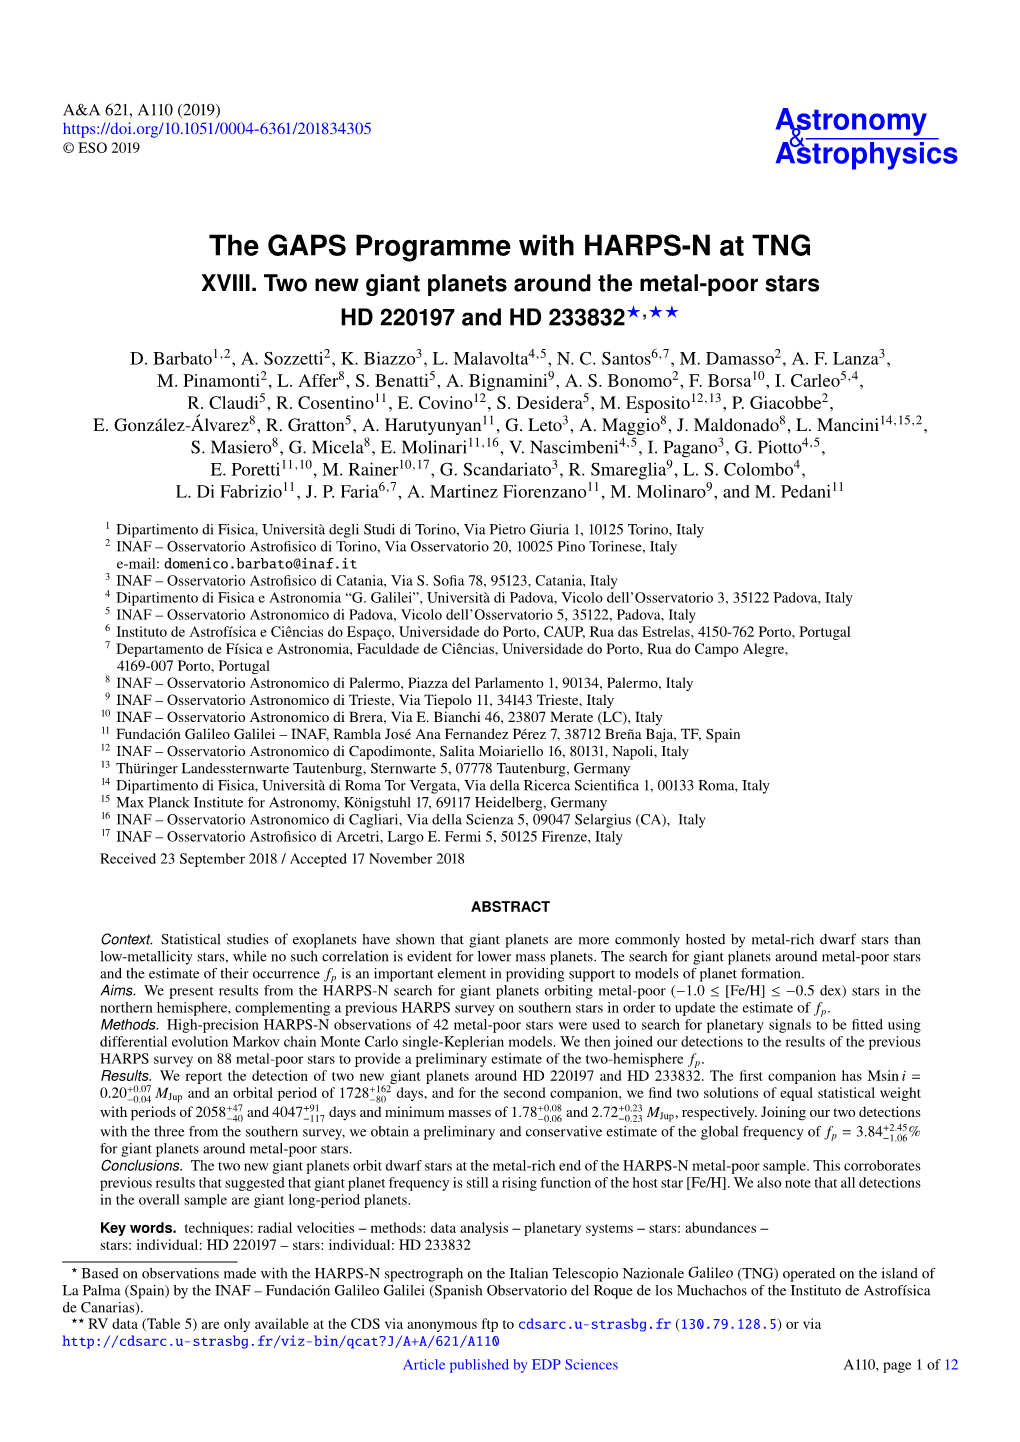 The GAPS Programme with HARPS-N at TNG XVIII